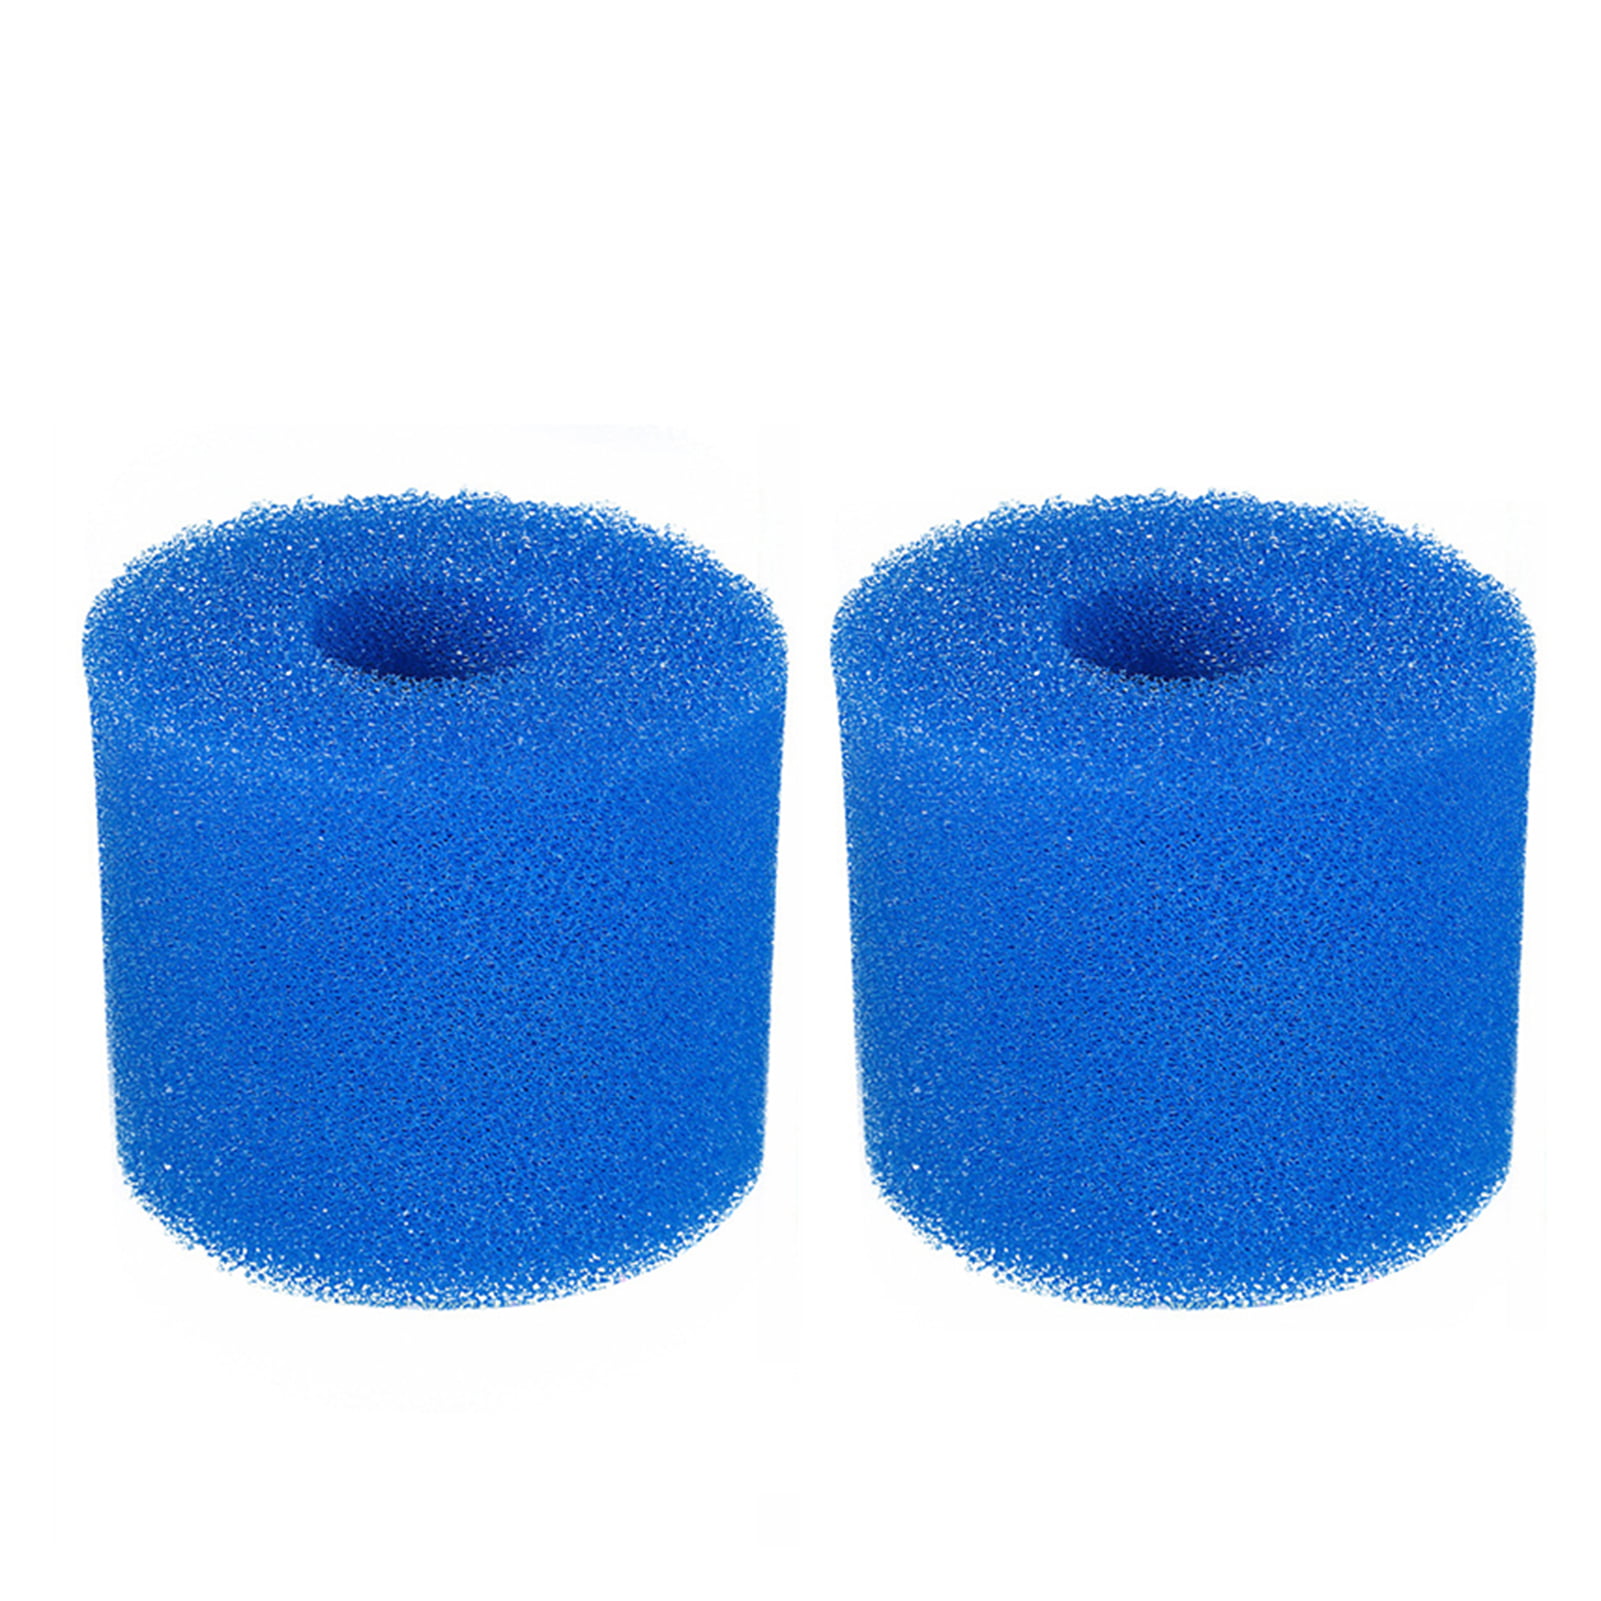 6Pack Replacing Washable Sponge Pool Filter for Intex Type S1 Swimming Pool Sponge Cartridge Filter Compatible with Intex Type S1 